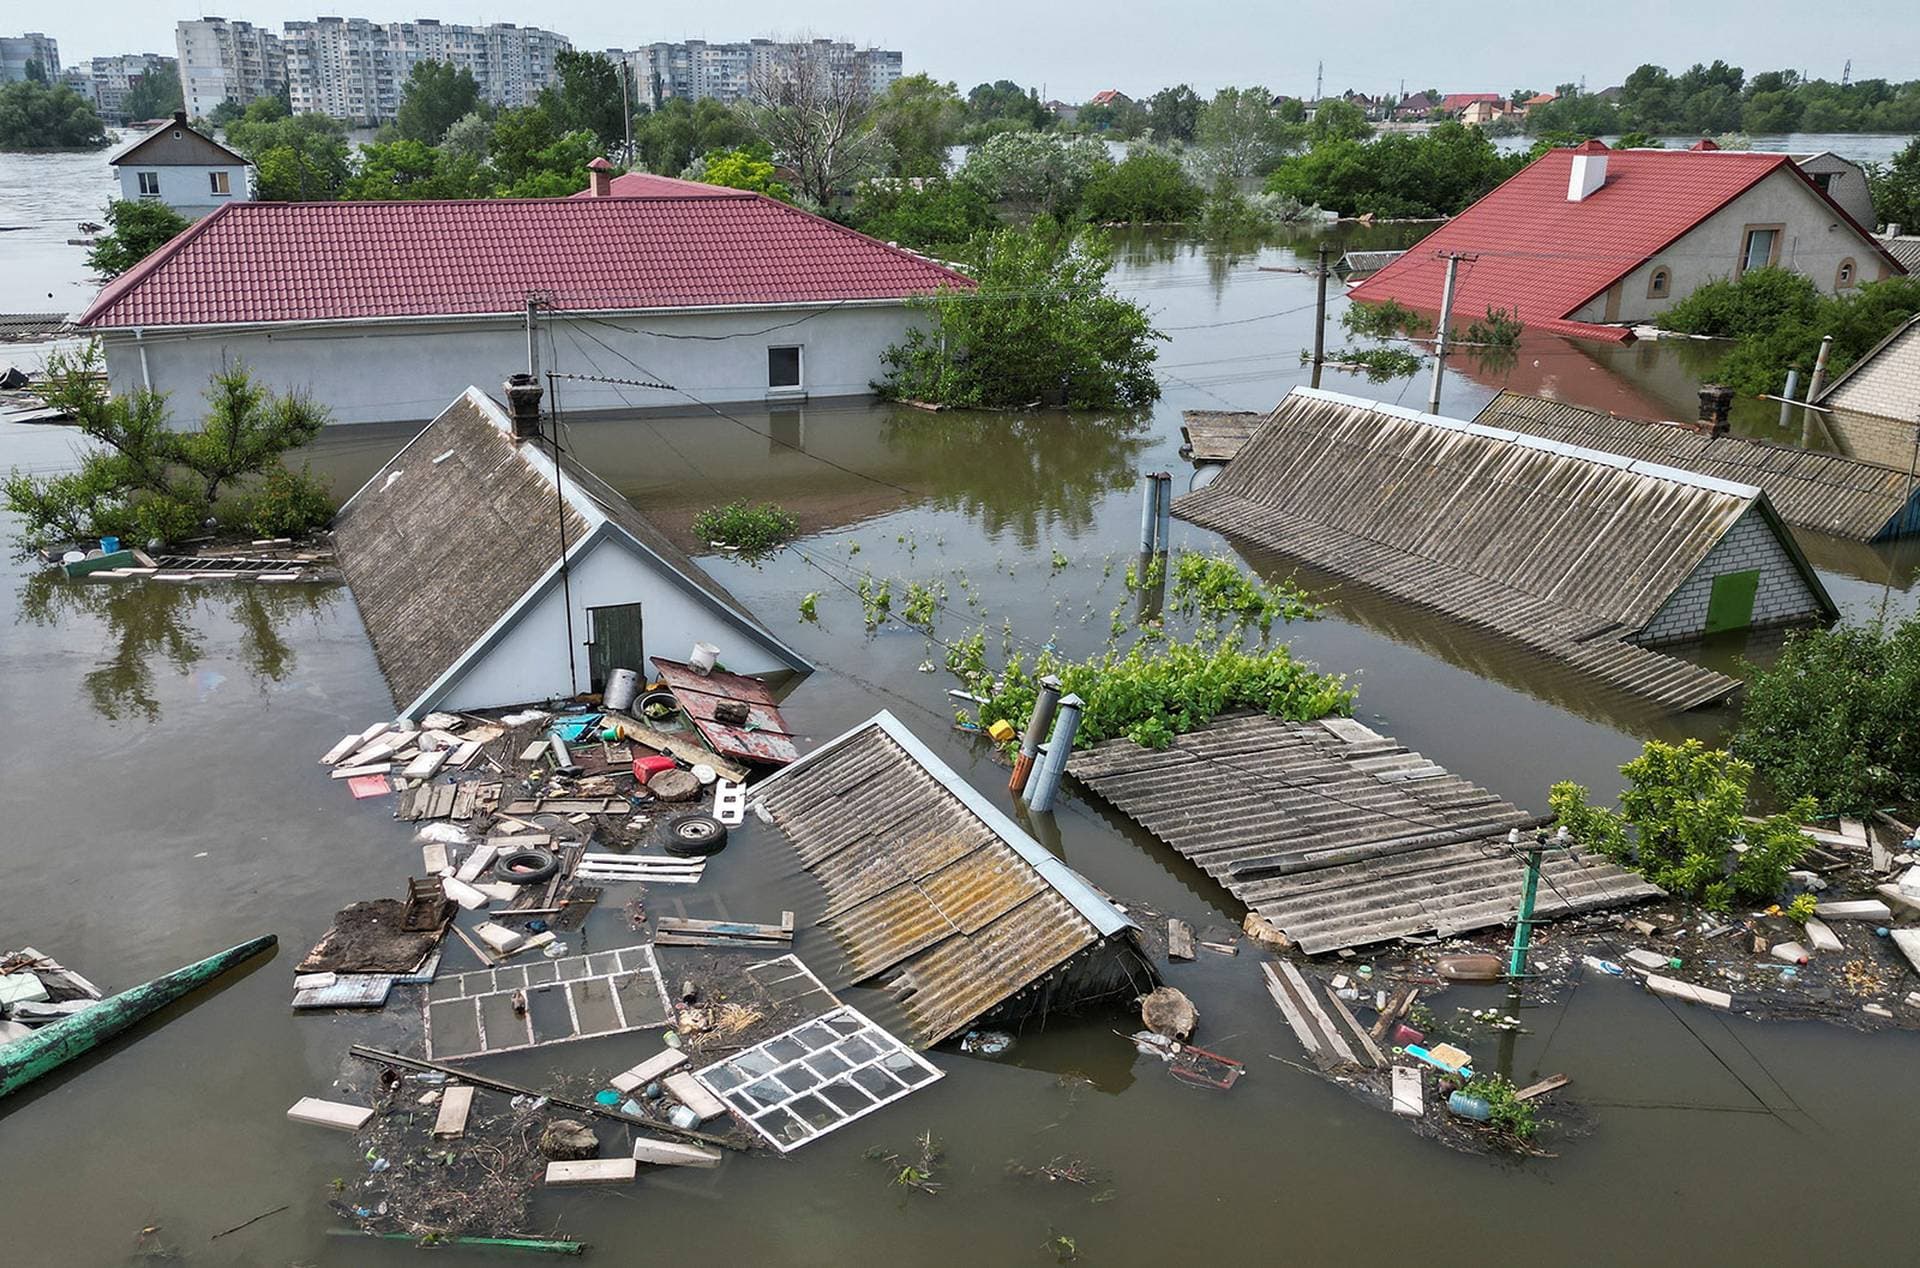 Flooded residential buildings in Kherson